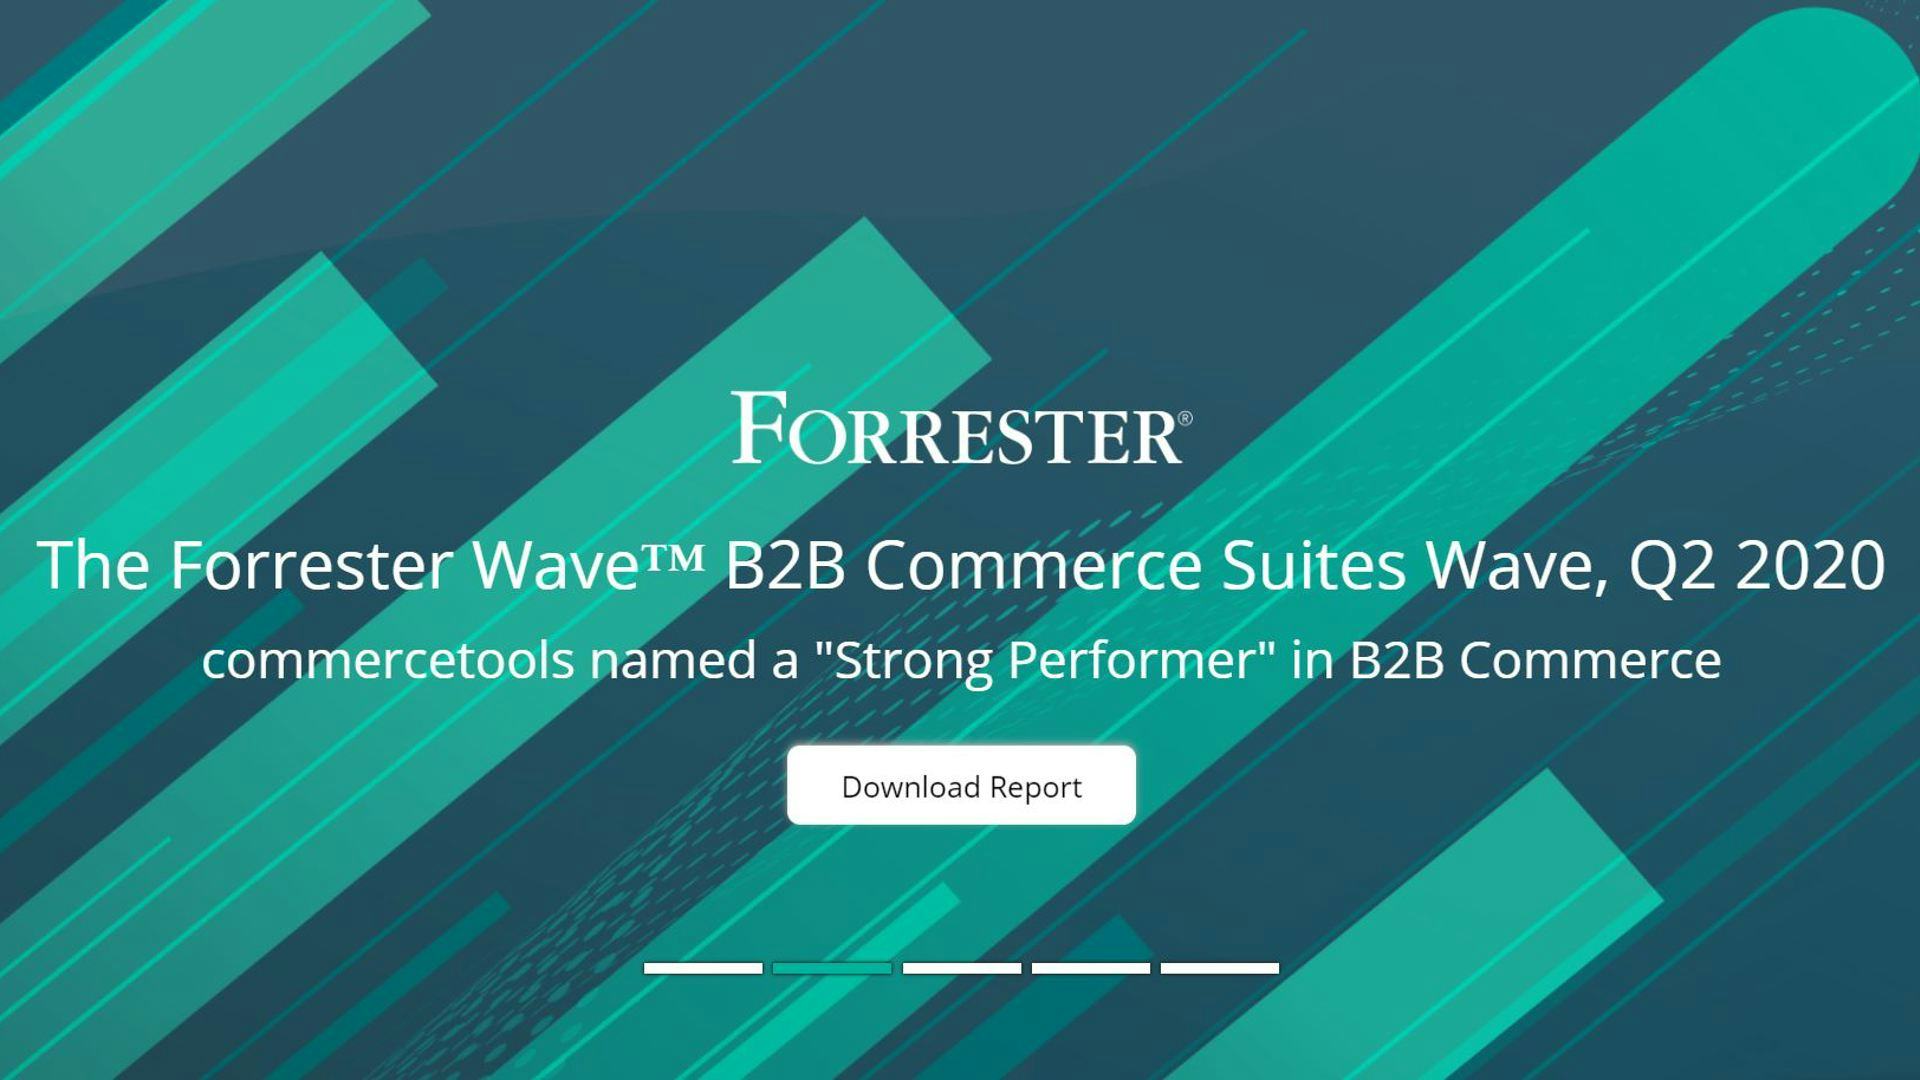 Commercetools Ist Strong Performer Im Forrester Wave Report